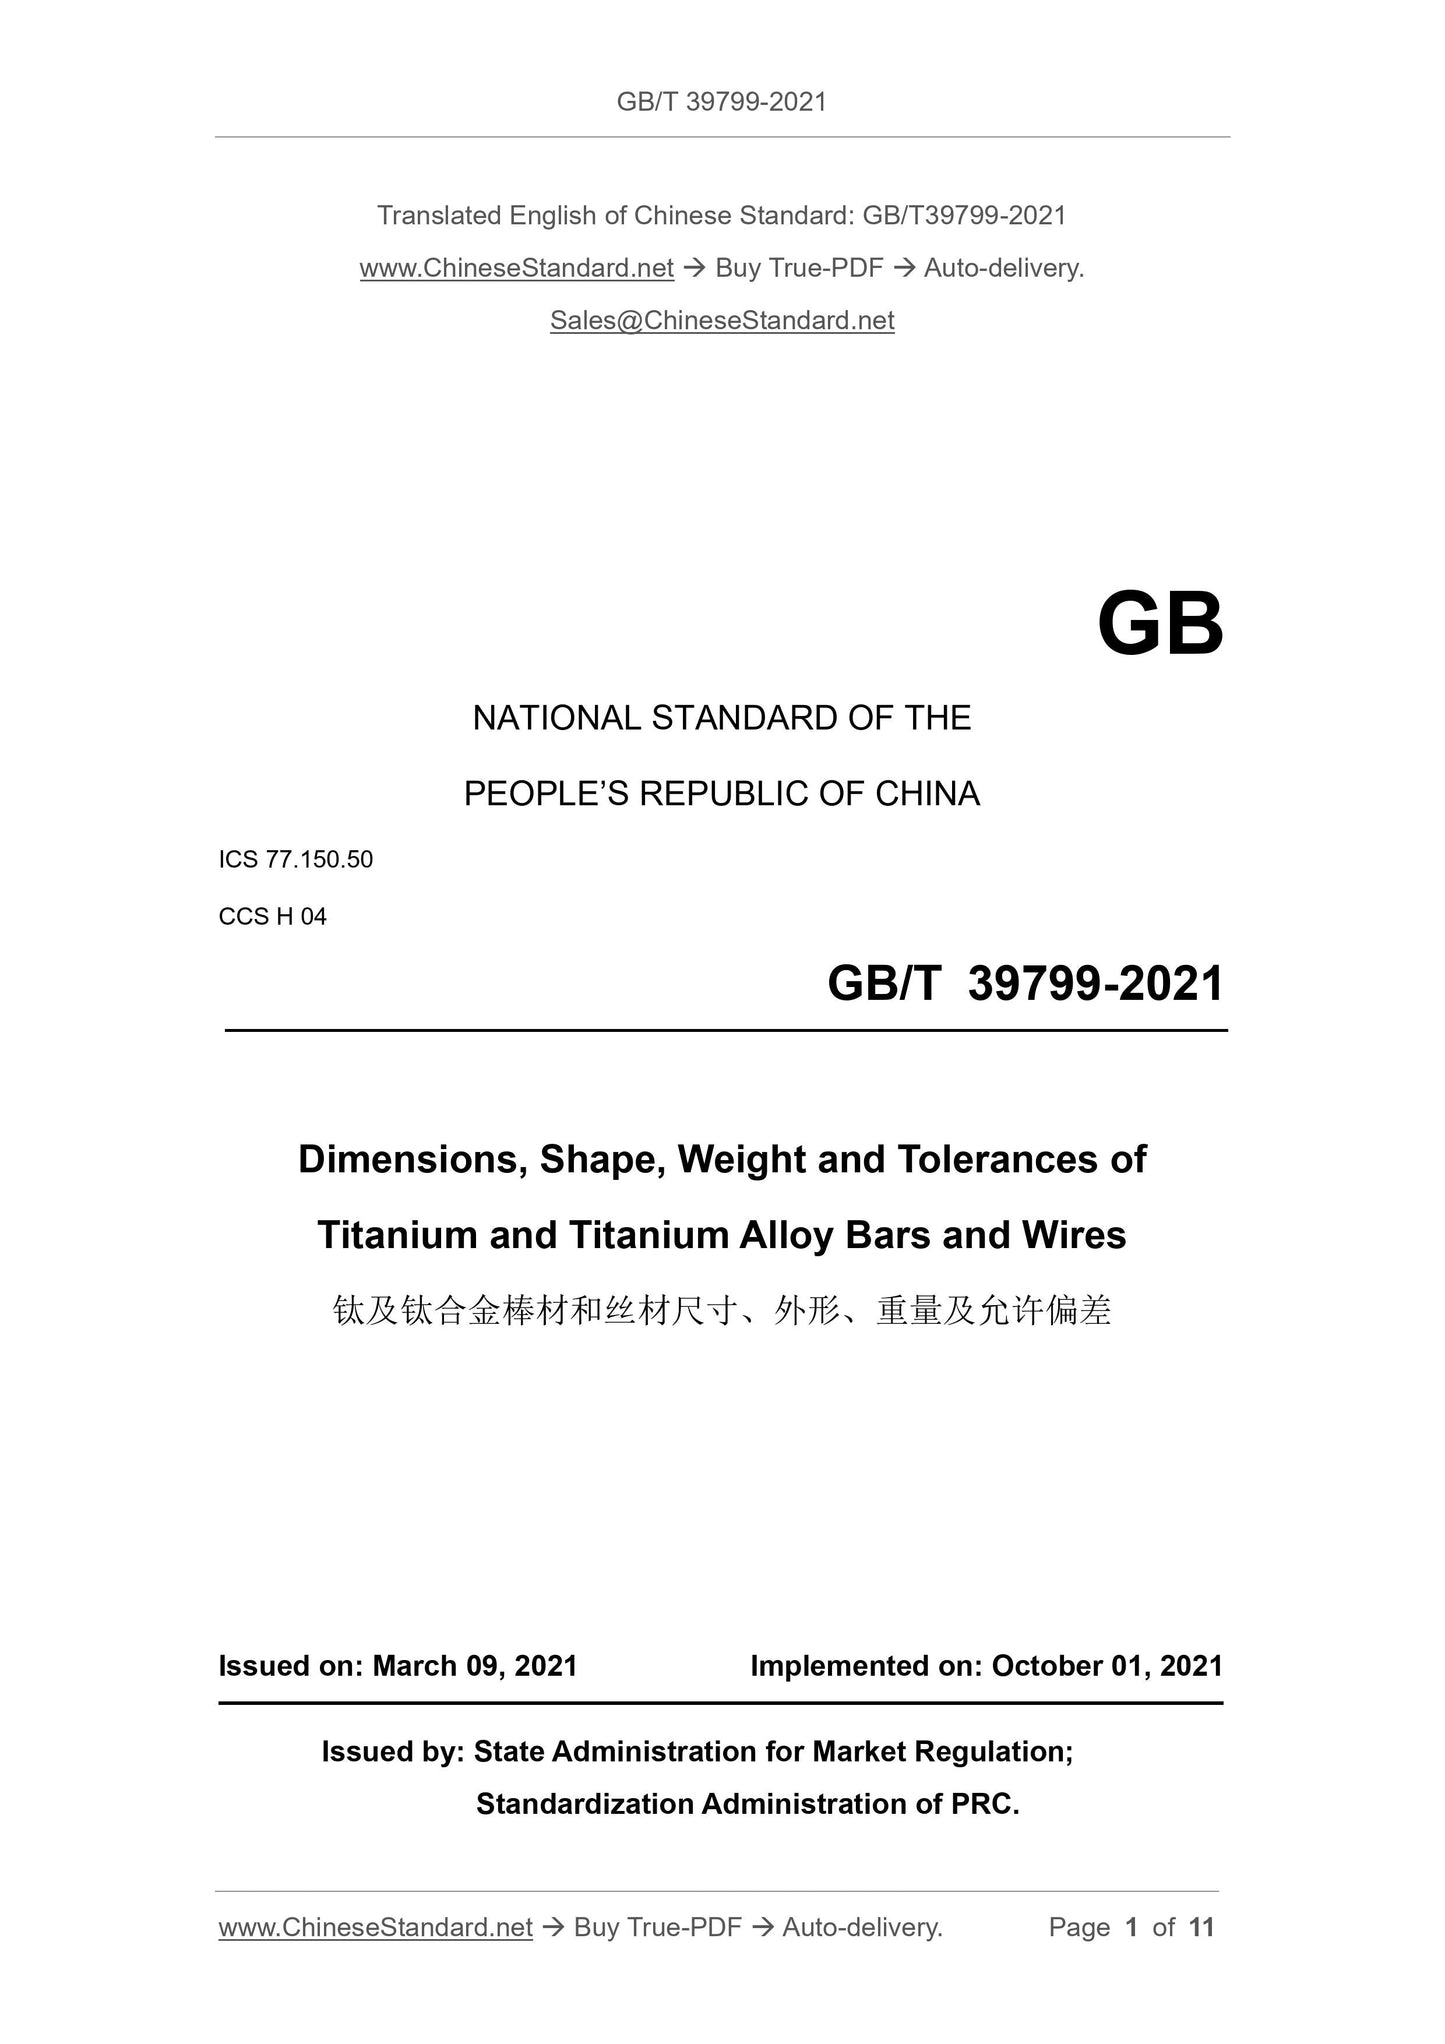 GB/T 39799-2021 Page 1